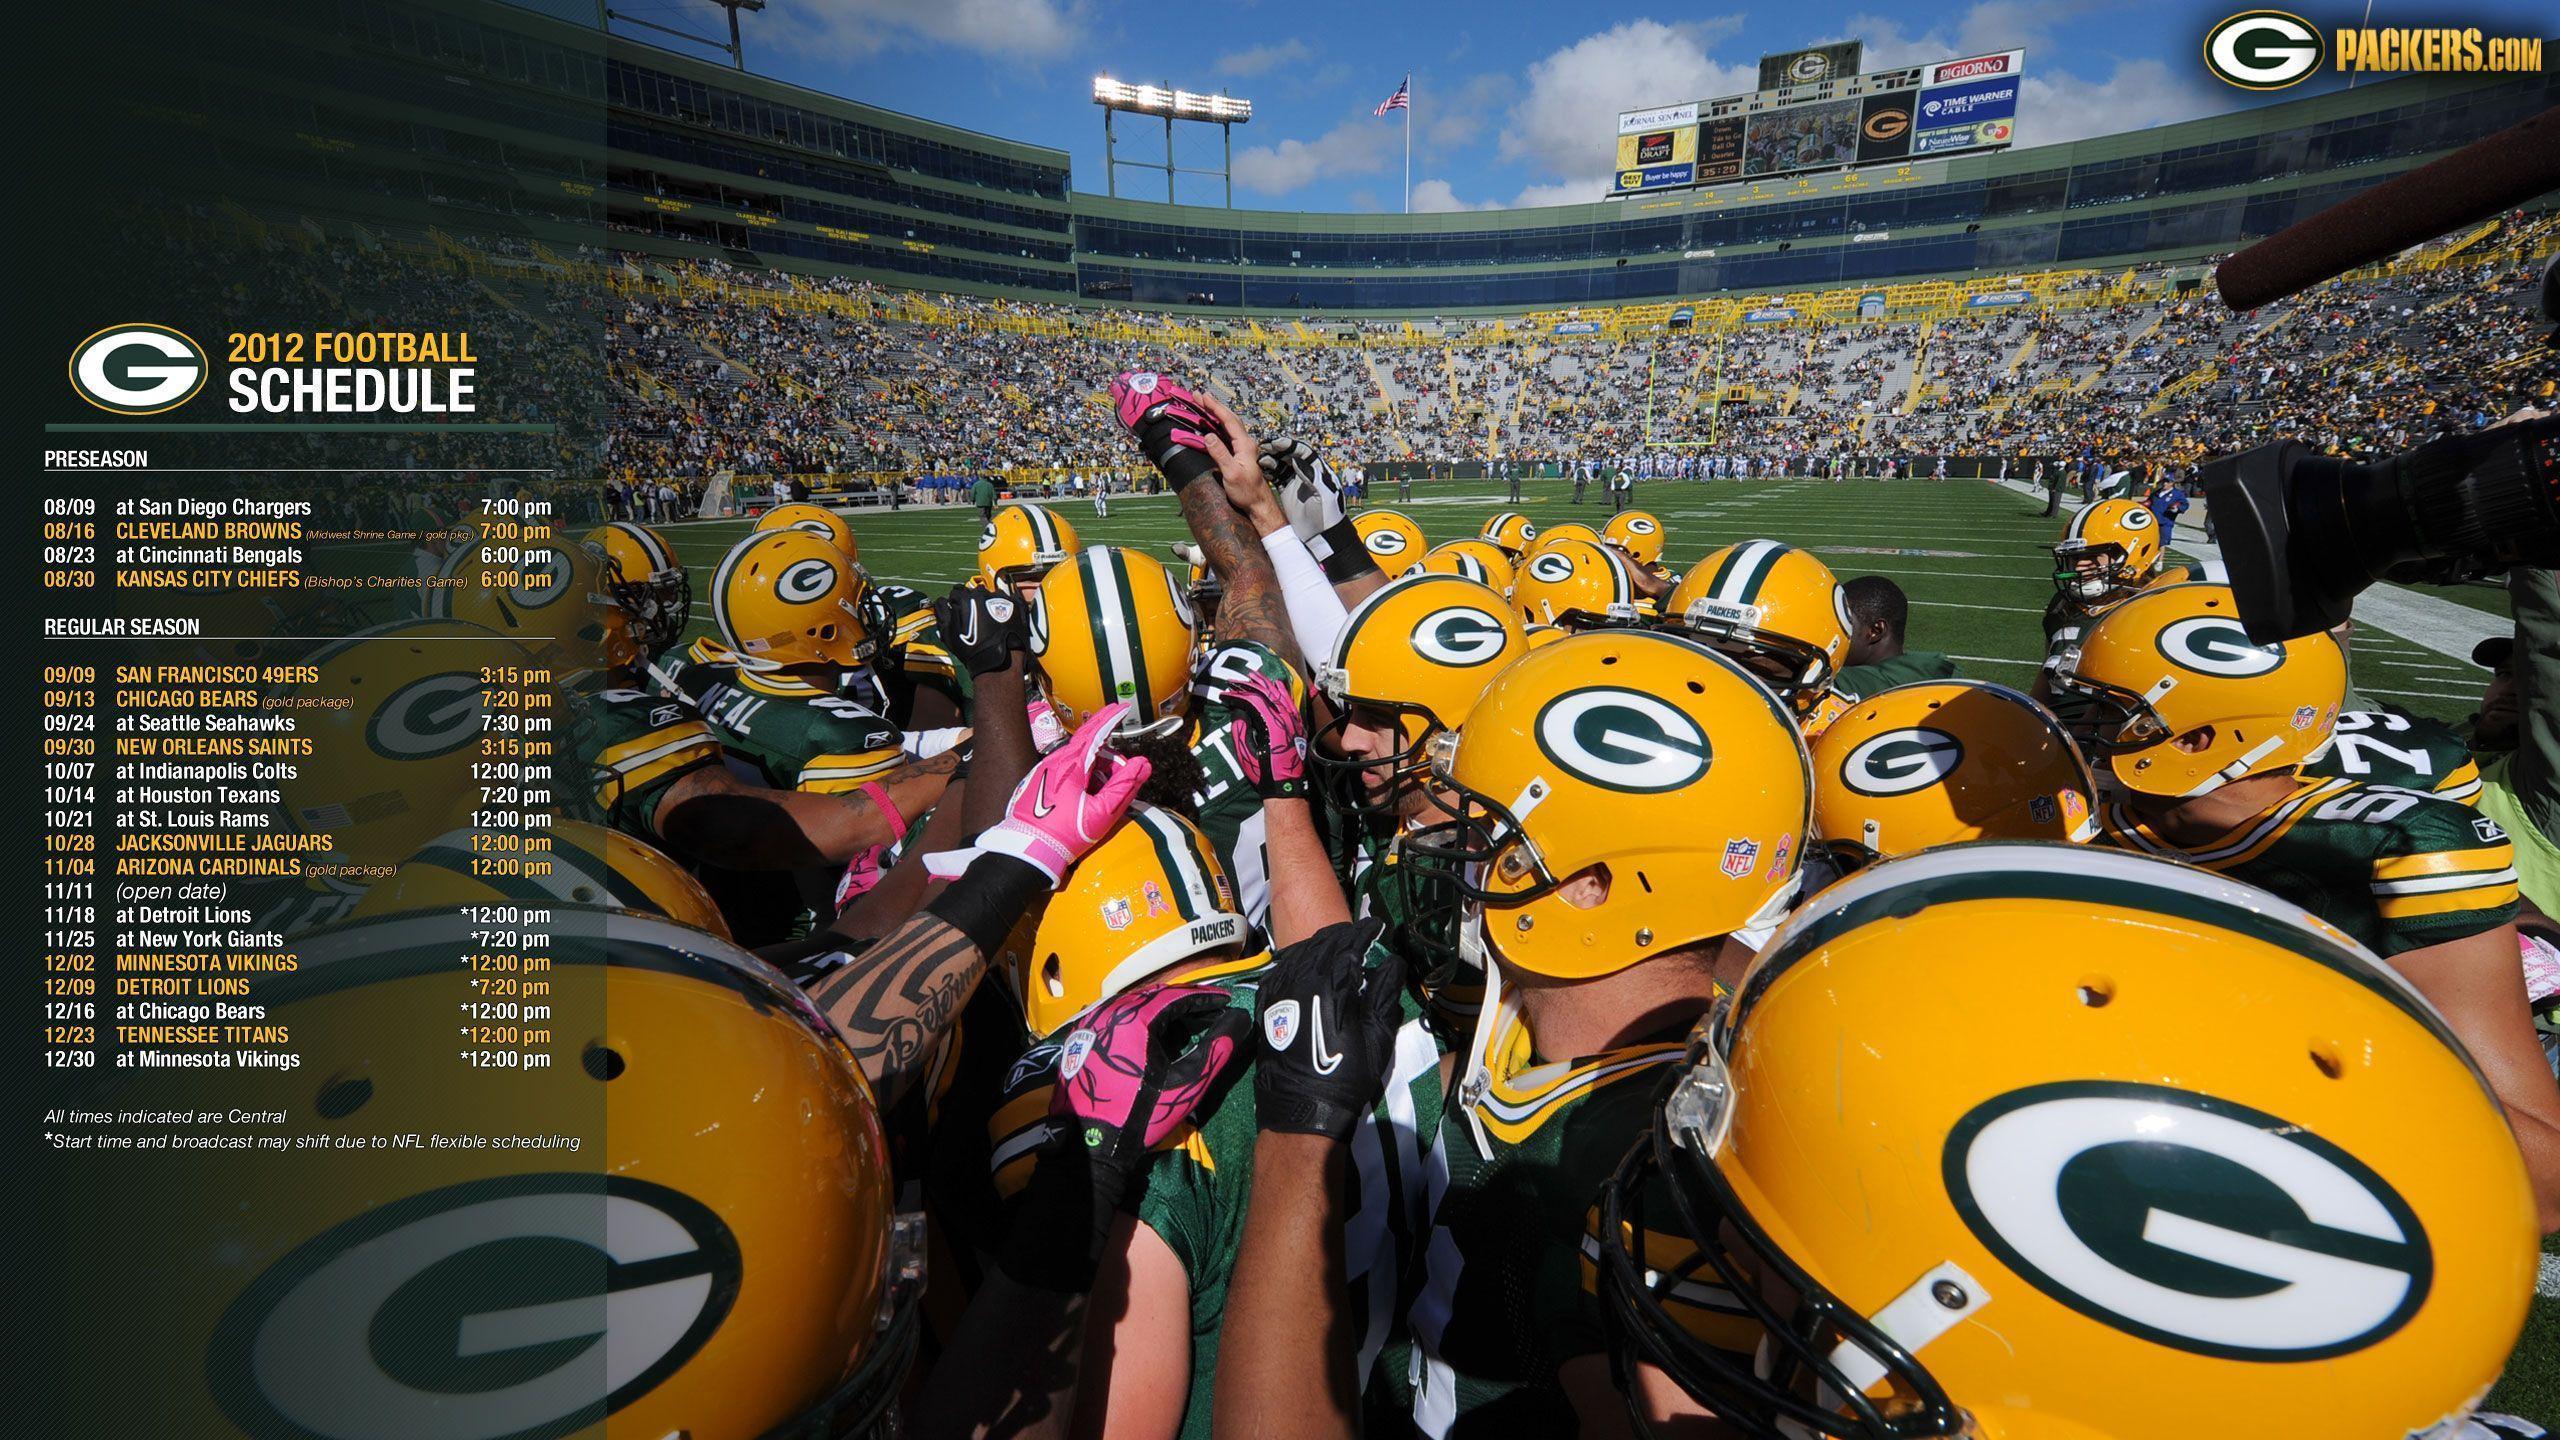 Packers.com. Wallpaper: 2012 Miscellaneous